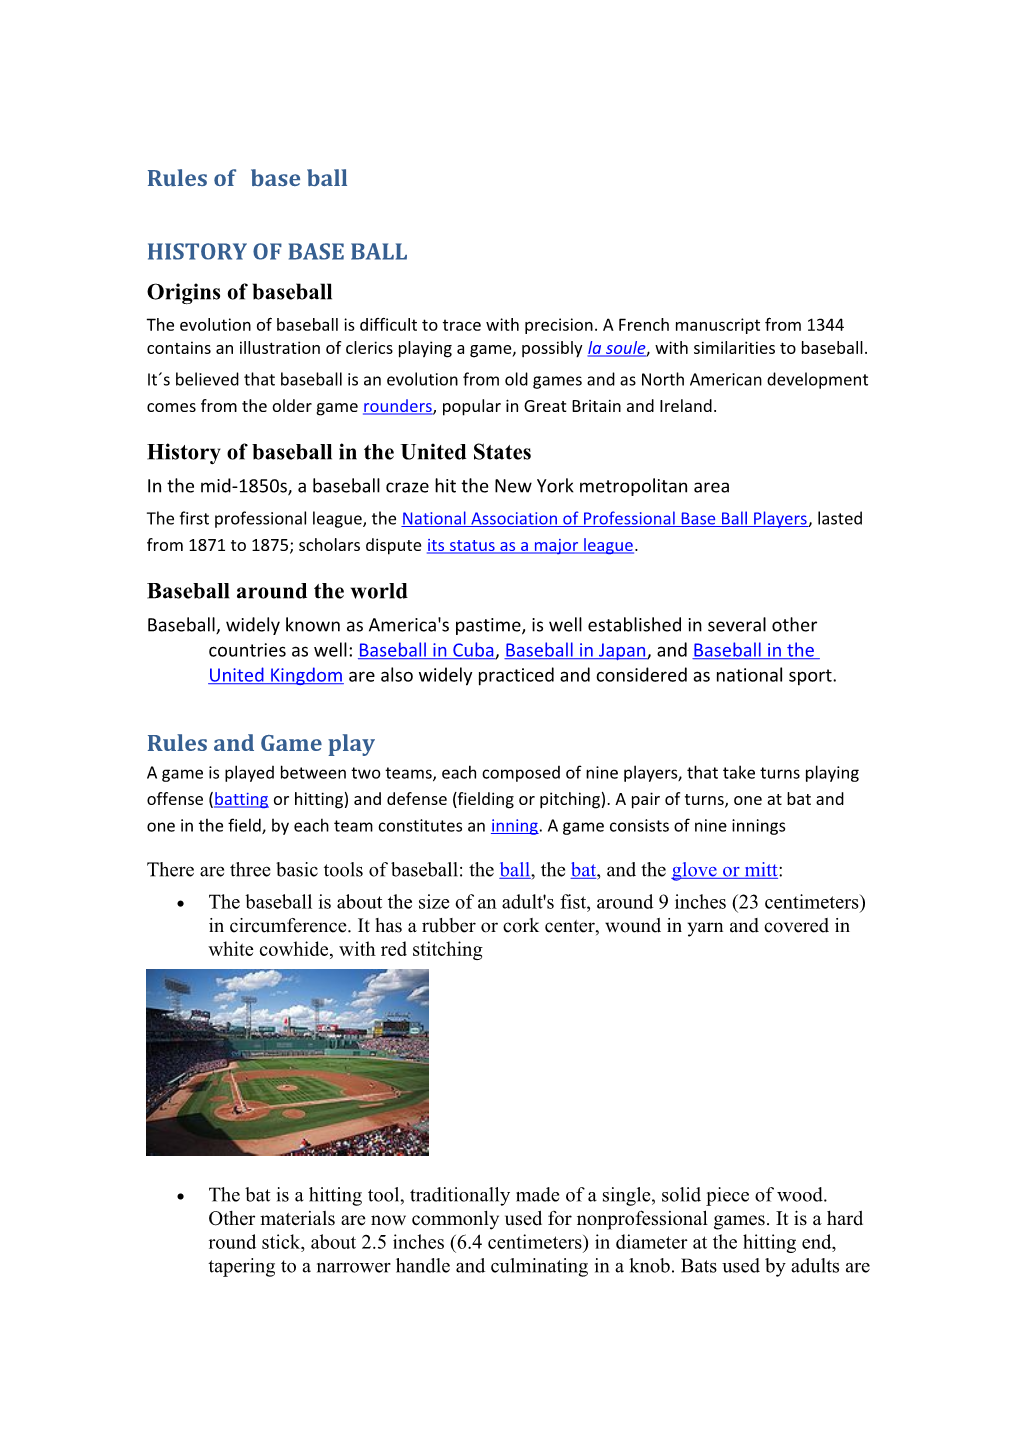 Rules of Base Ball